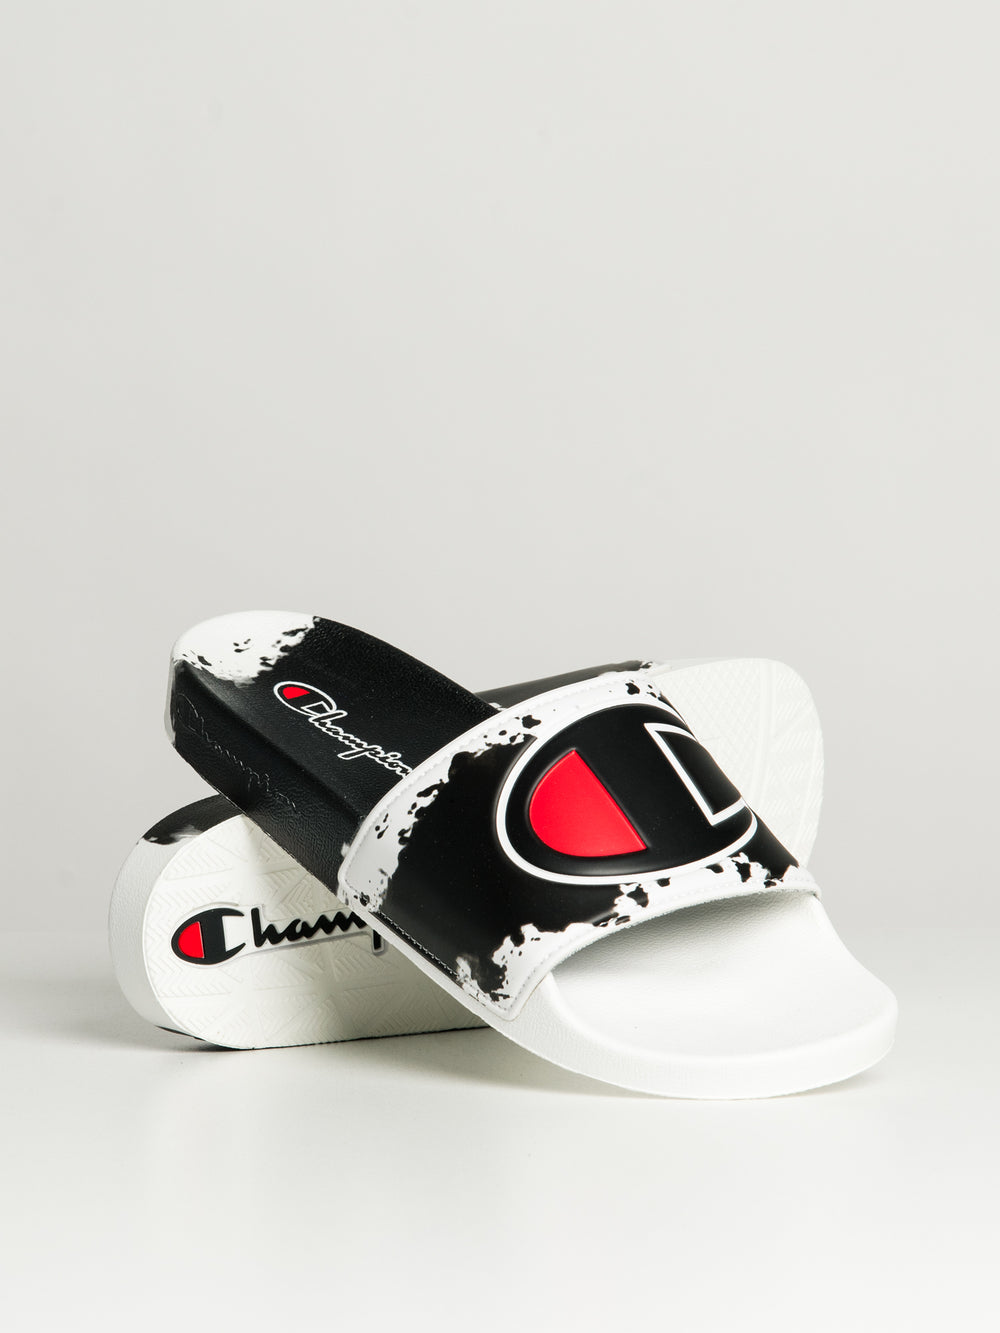 MENS CHAMPION IPO SURF & TURF SLIDES - CLEARANCE